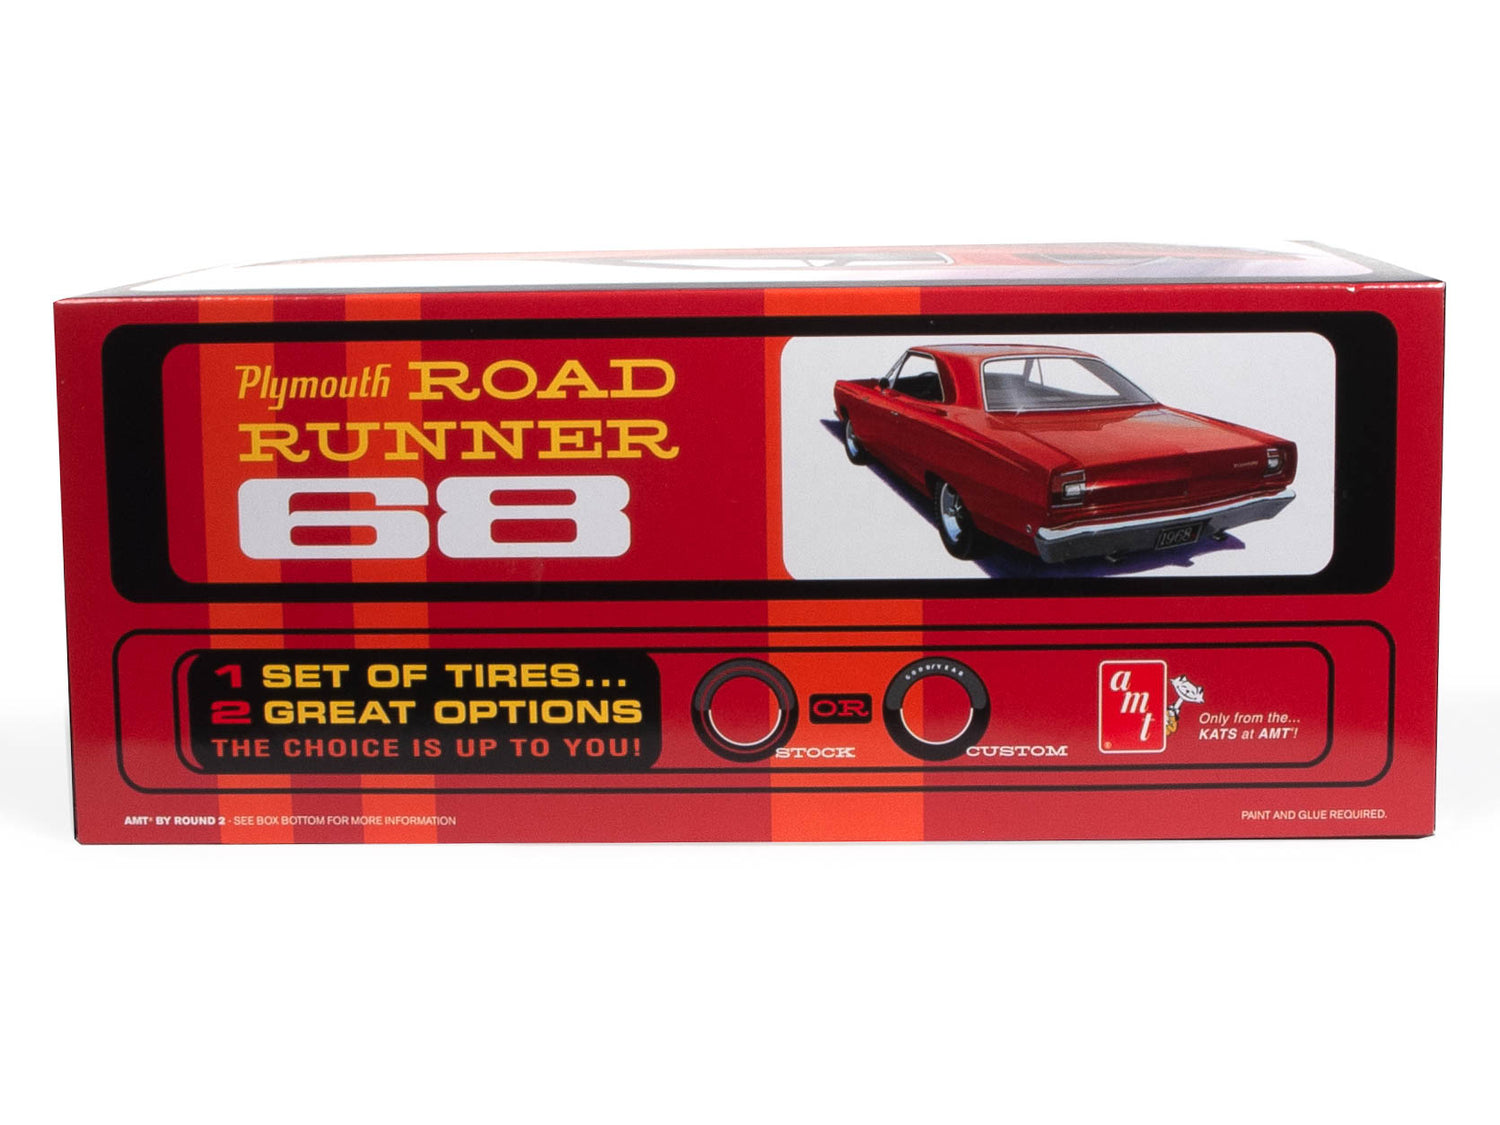 AMT 1968 Plymouth Road Runner Customizing Kit 1:25 Scale Model Kit